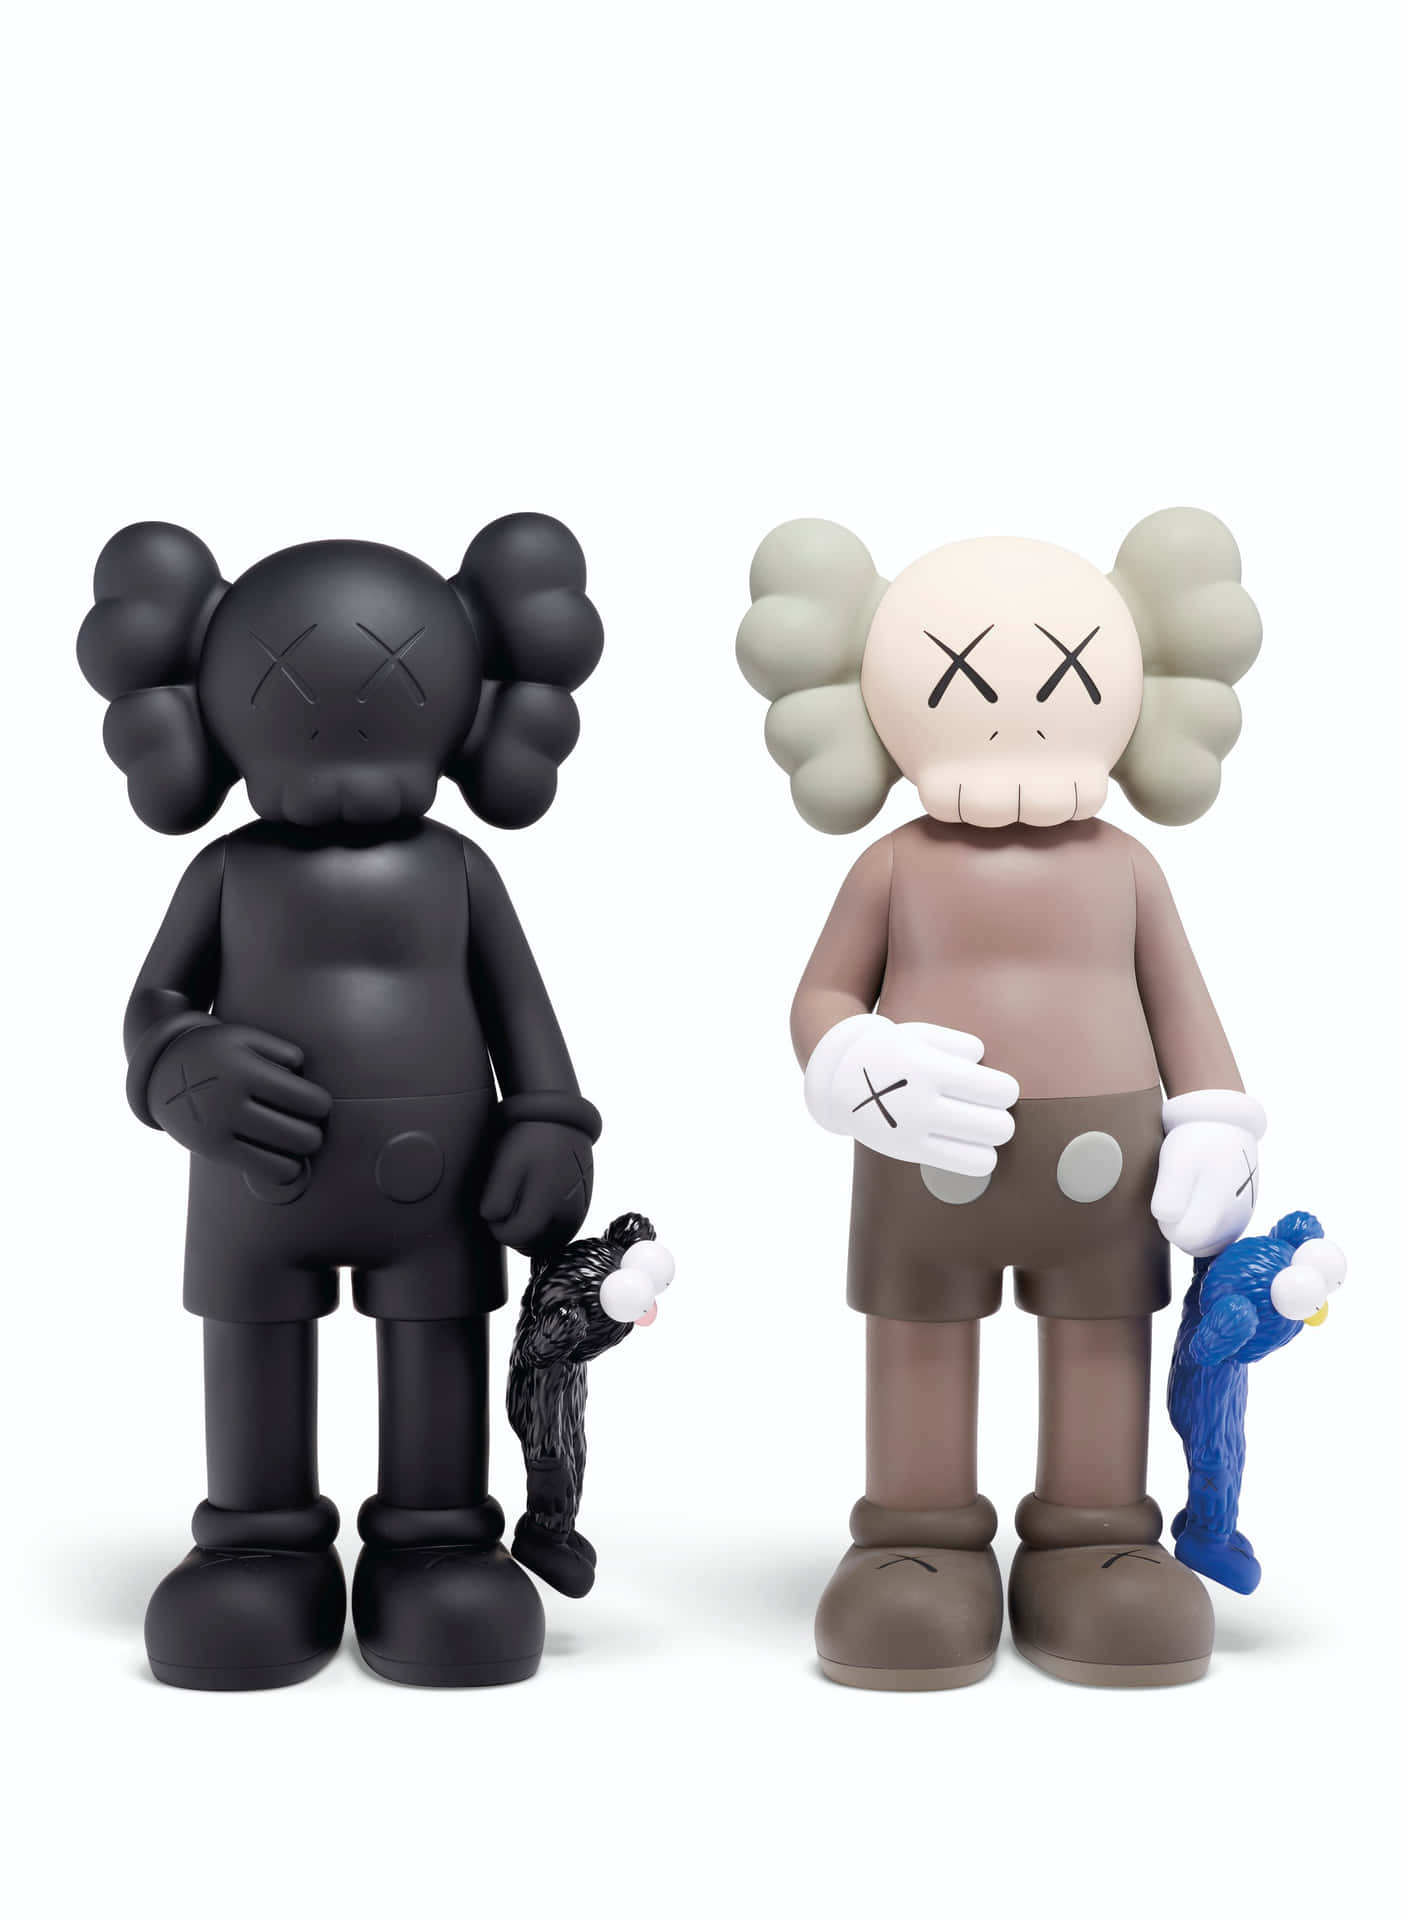 KAWS BFF: Iconic Art and Endearing Friendship Wallpaper